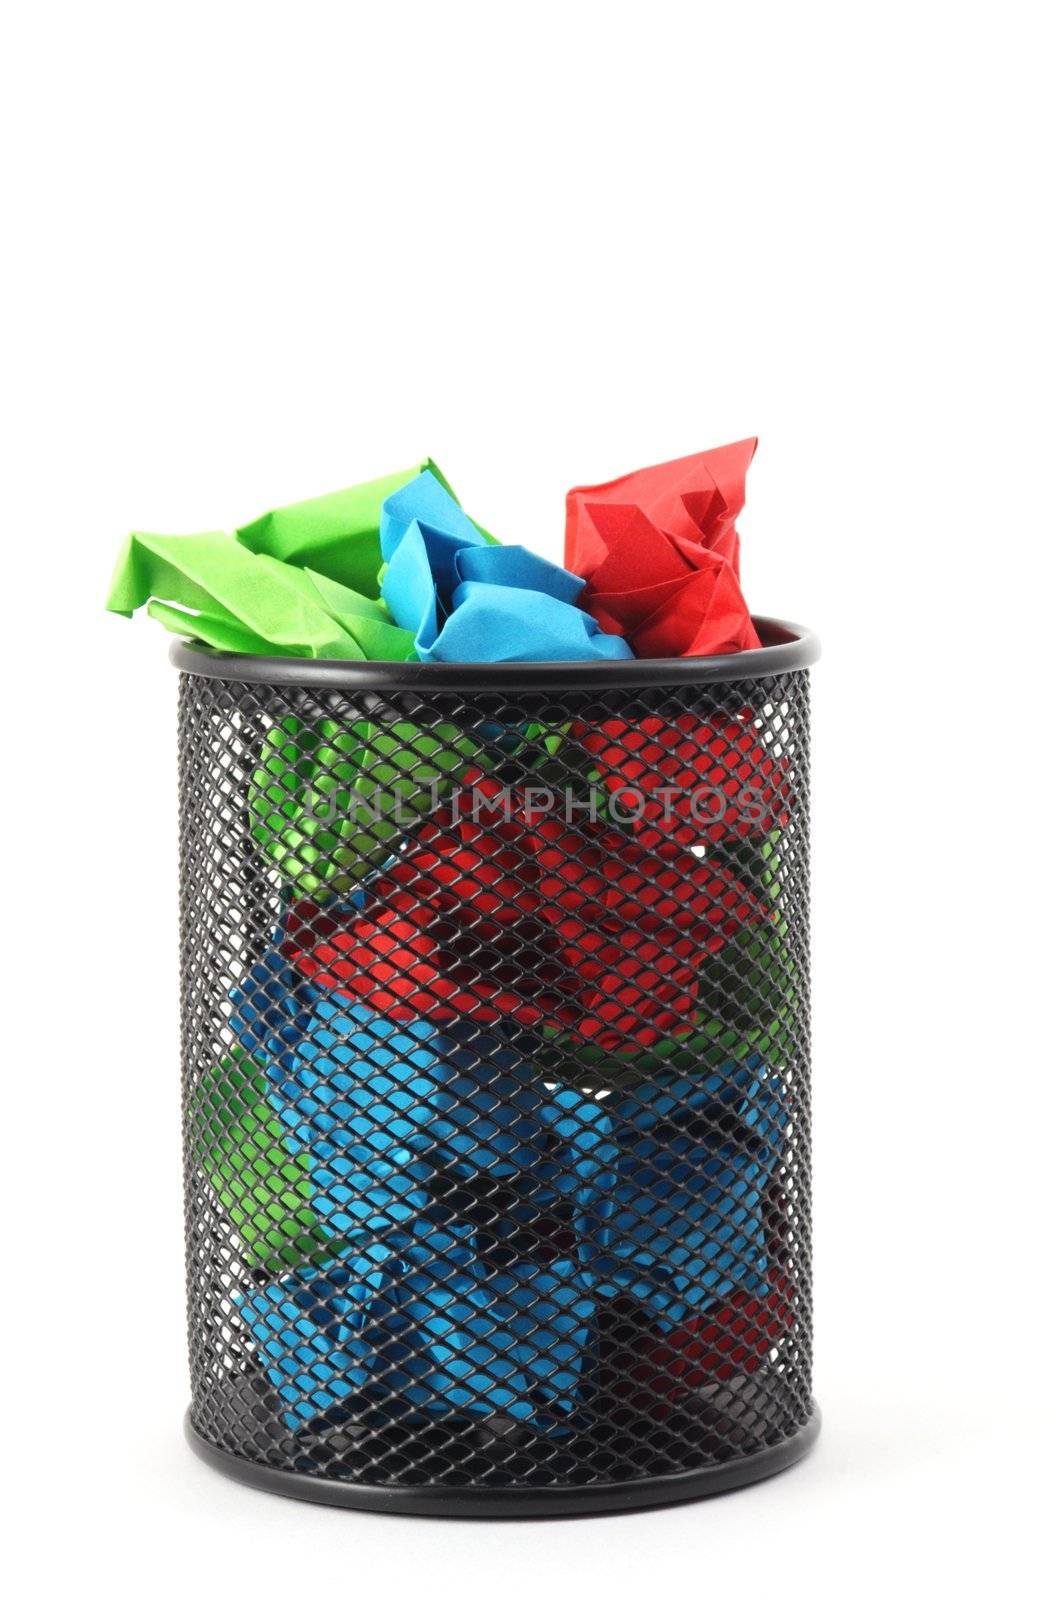 trash or rubbish paper in basket isolated on white background